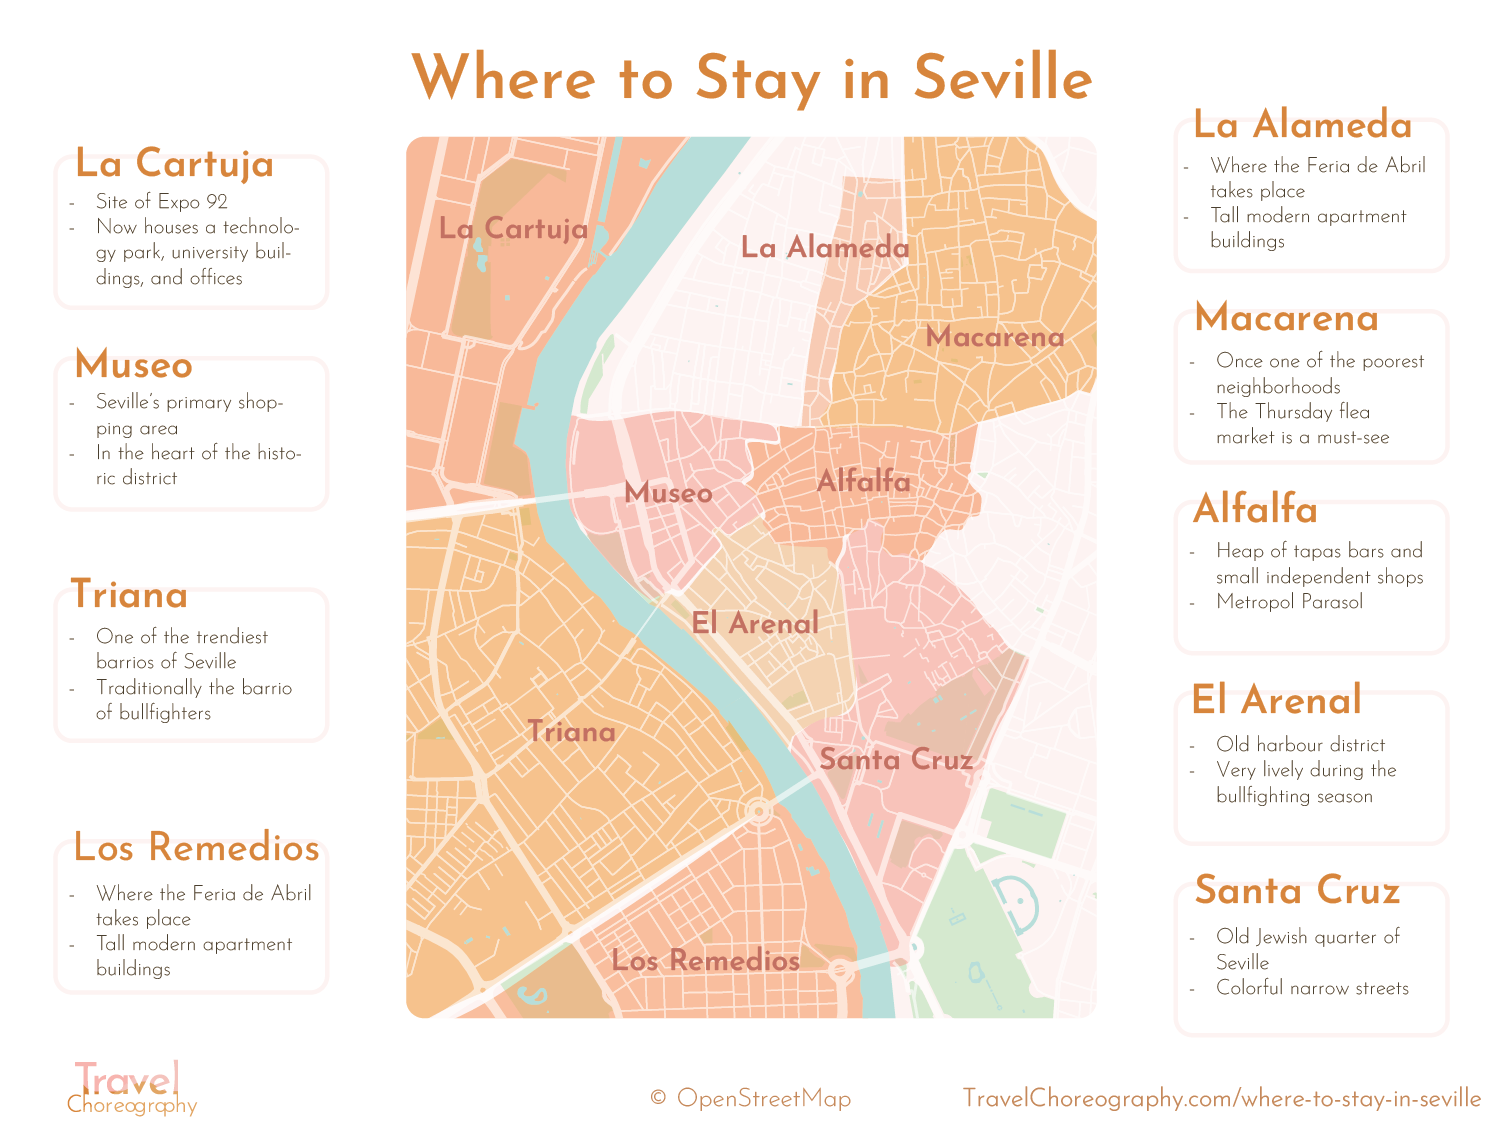 where to stay in seville, Best Neighborhoods Guide, tourist map